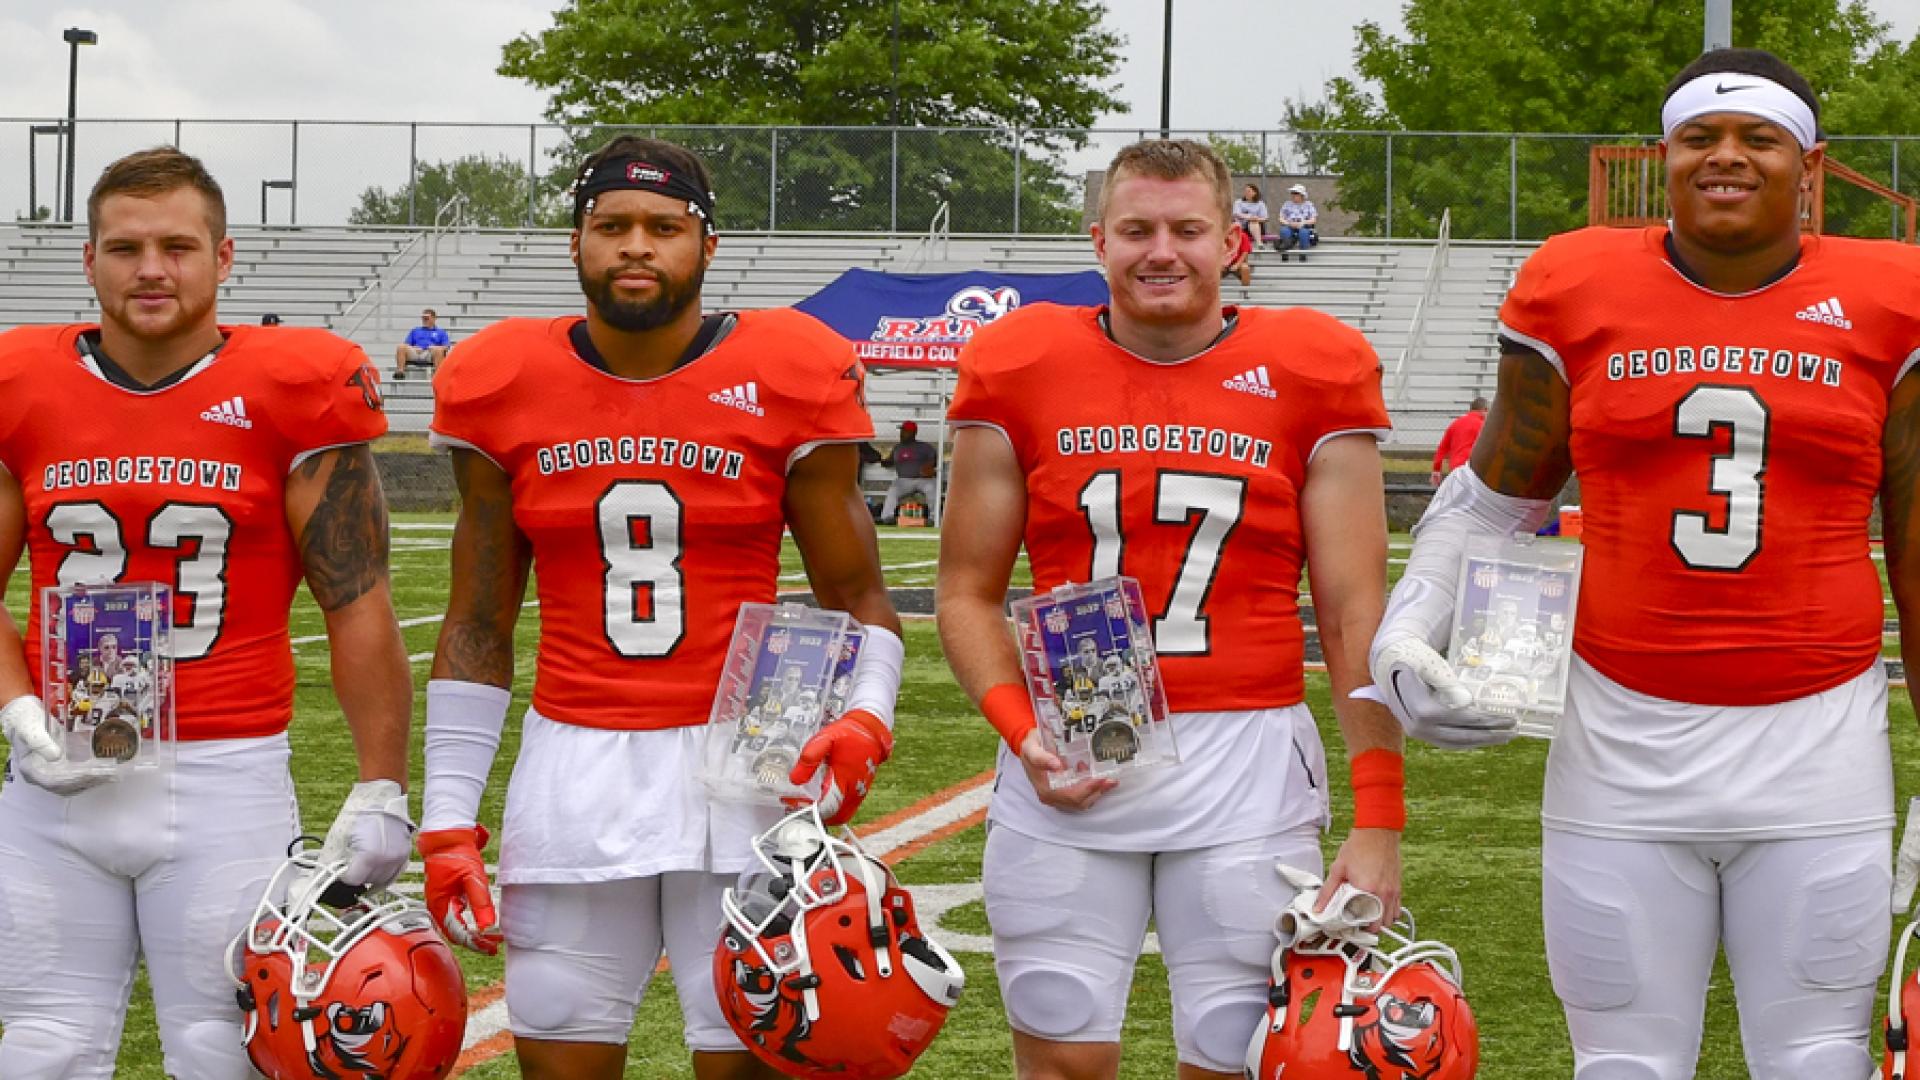 Photo from L to R: #23 Standifer, #8 Sheffield, #17 Maggard, and #3 White were named to the 2022 Community Trust Bank Collegiate All-Commonwealth Team